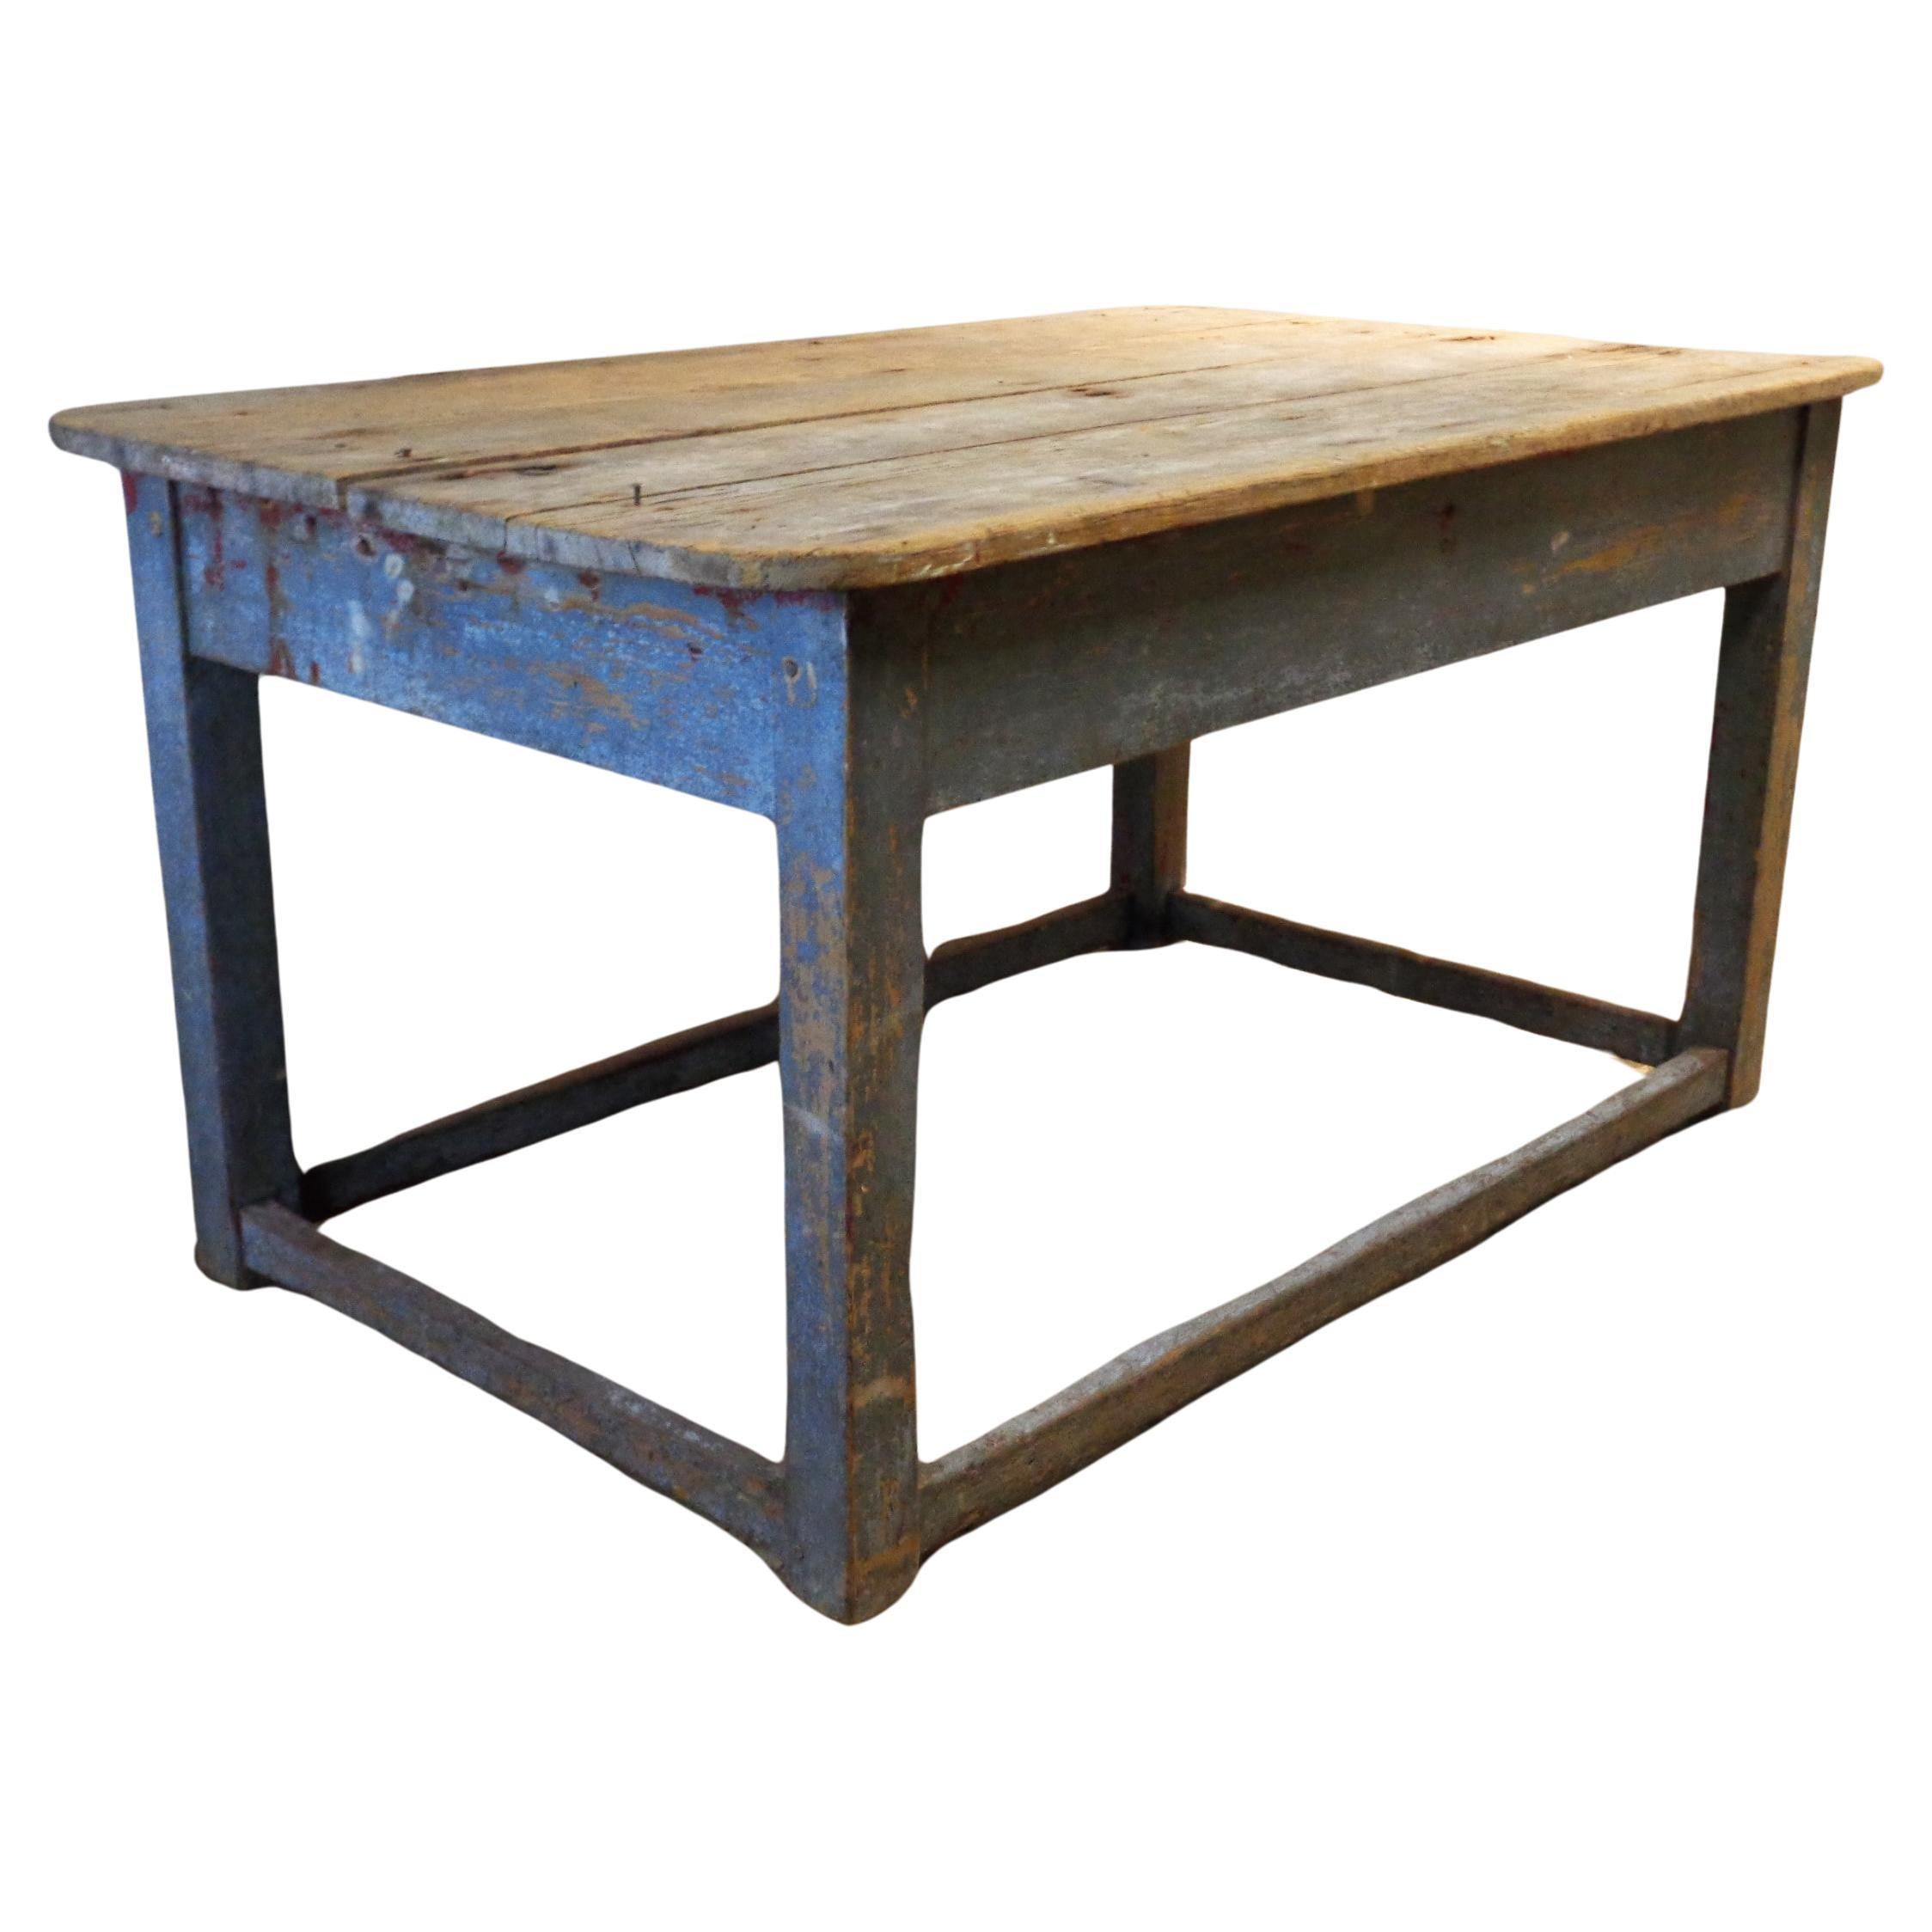  Early 19th Century Original Blue Painted Rustic Work Table  im Angebot 2